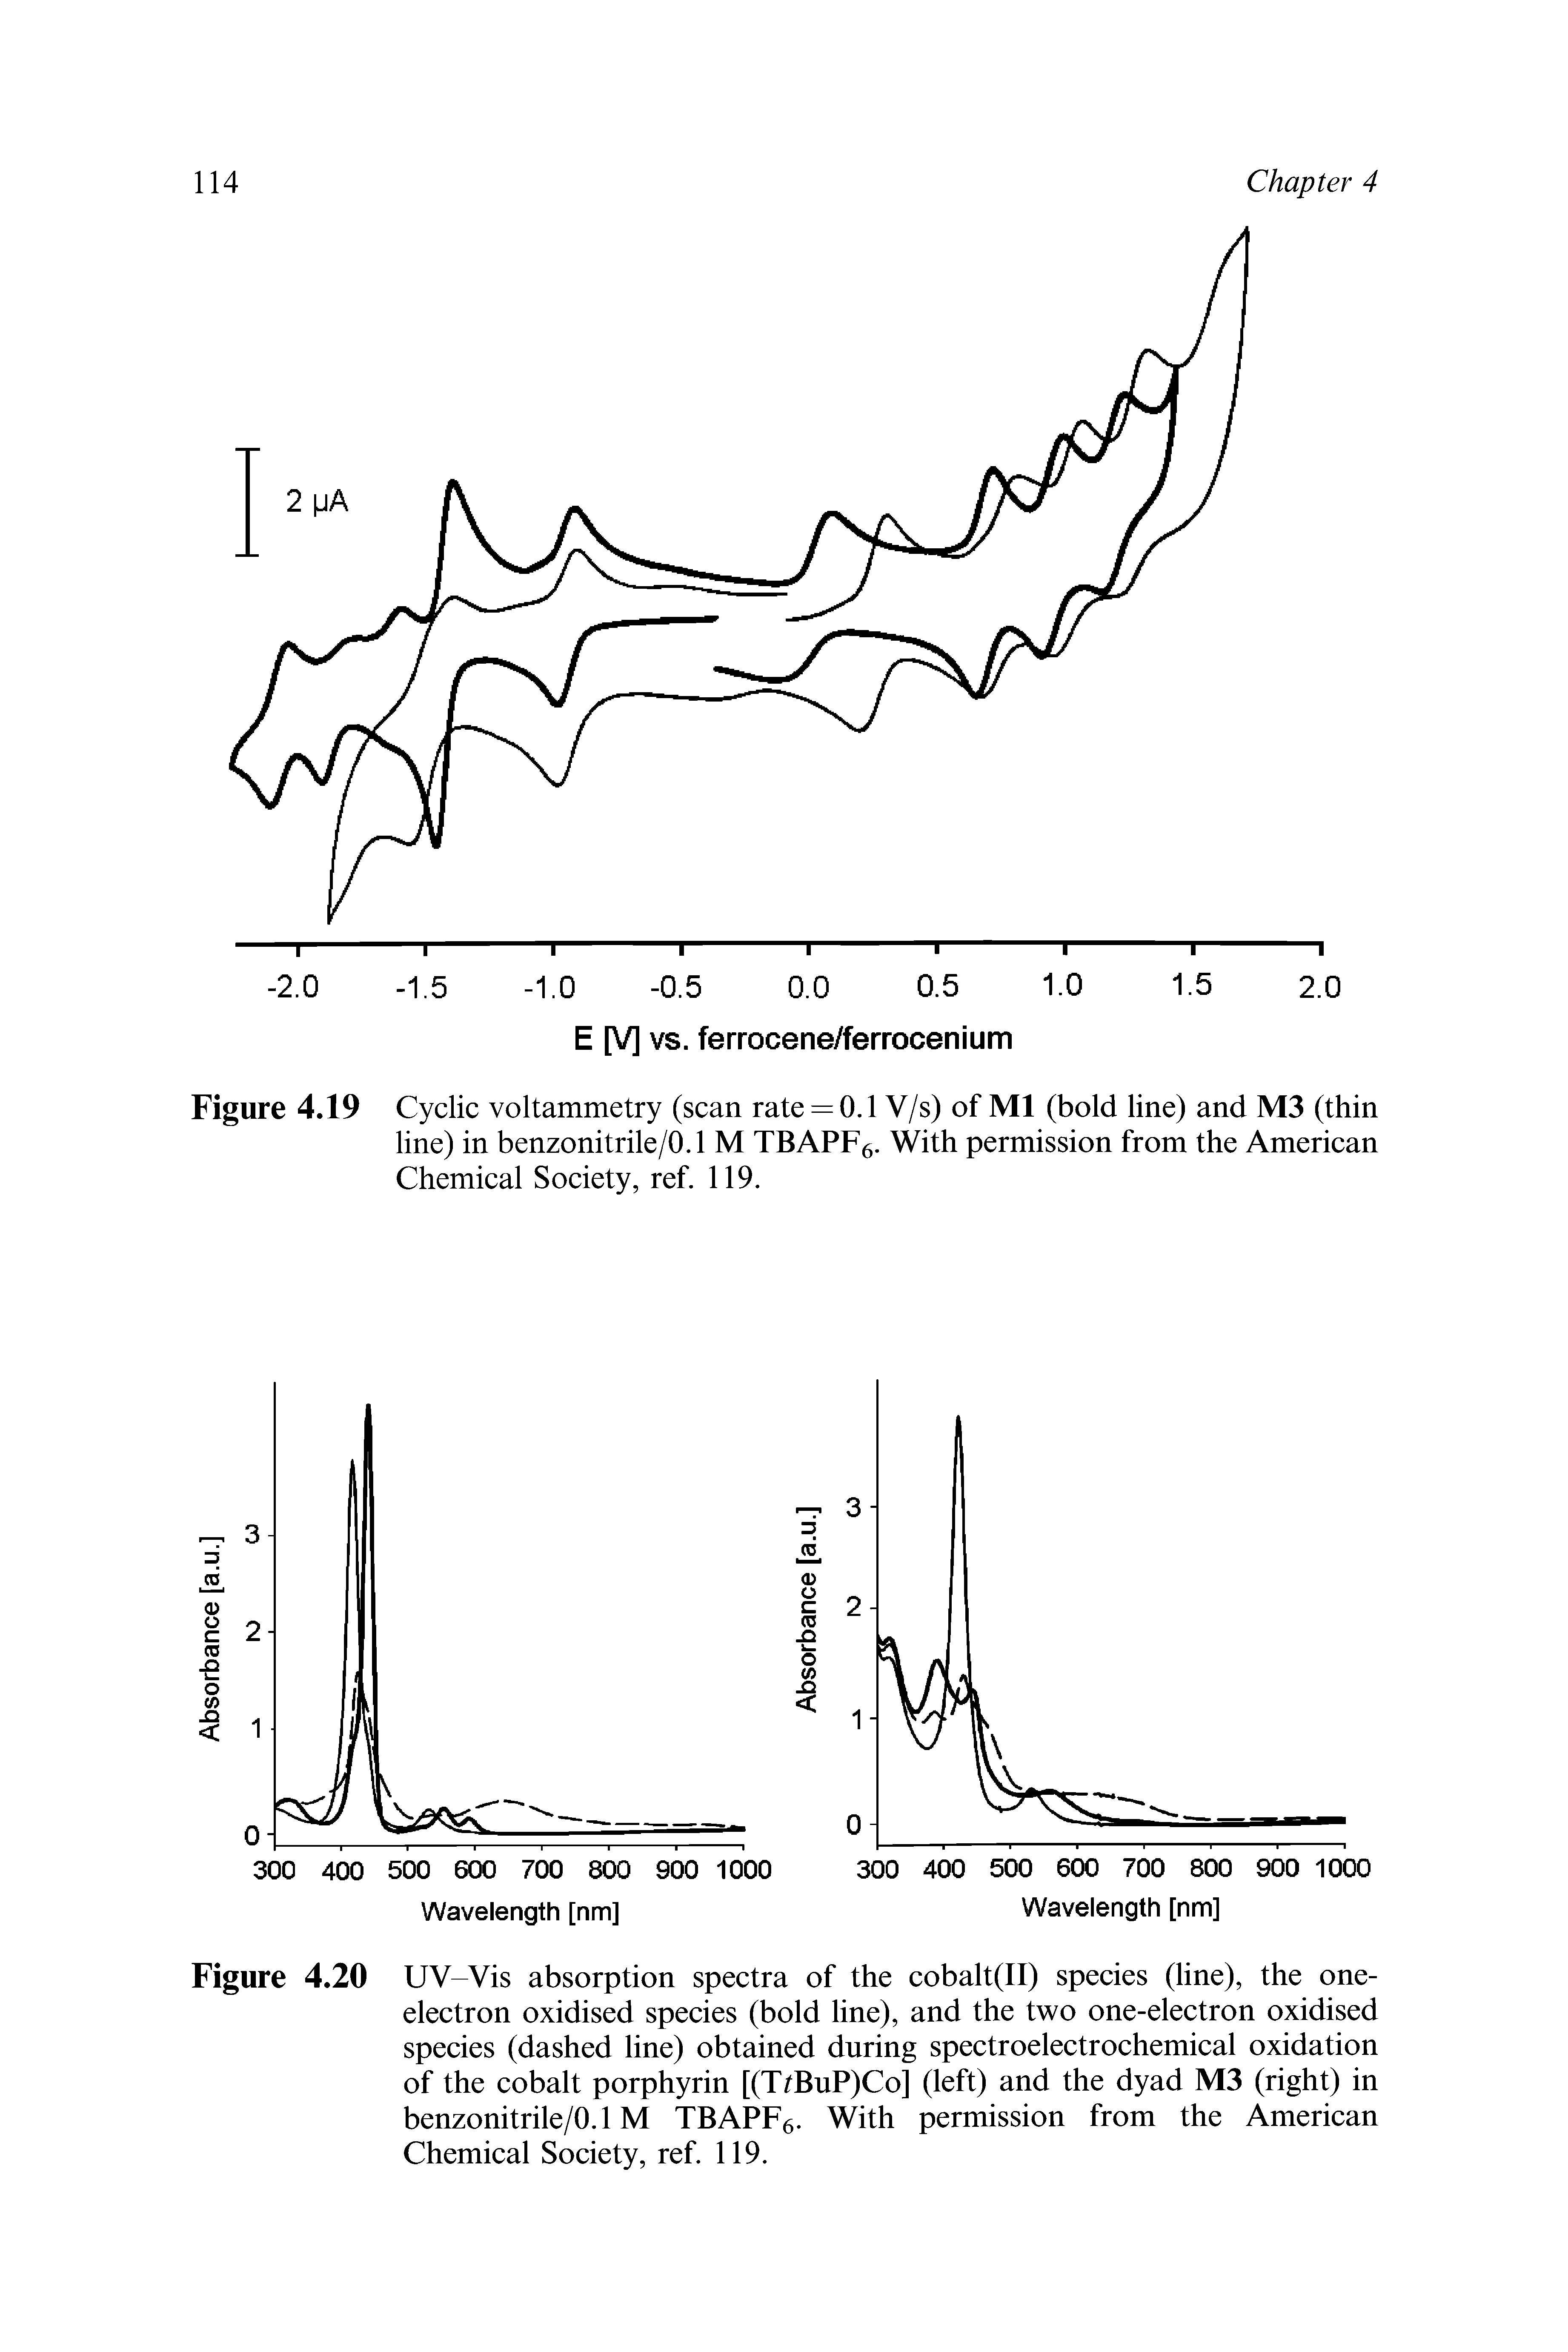 Figure 4.19 Cyclic voltammetry (scan rate = 0.1 V/s) of Ml (bold line) and M3 (thin line) in benzonitrile/0.1 M TBAPF6. With permission from the American Chemical Society, ref. 119.